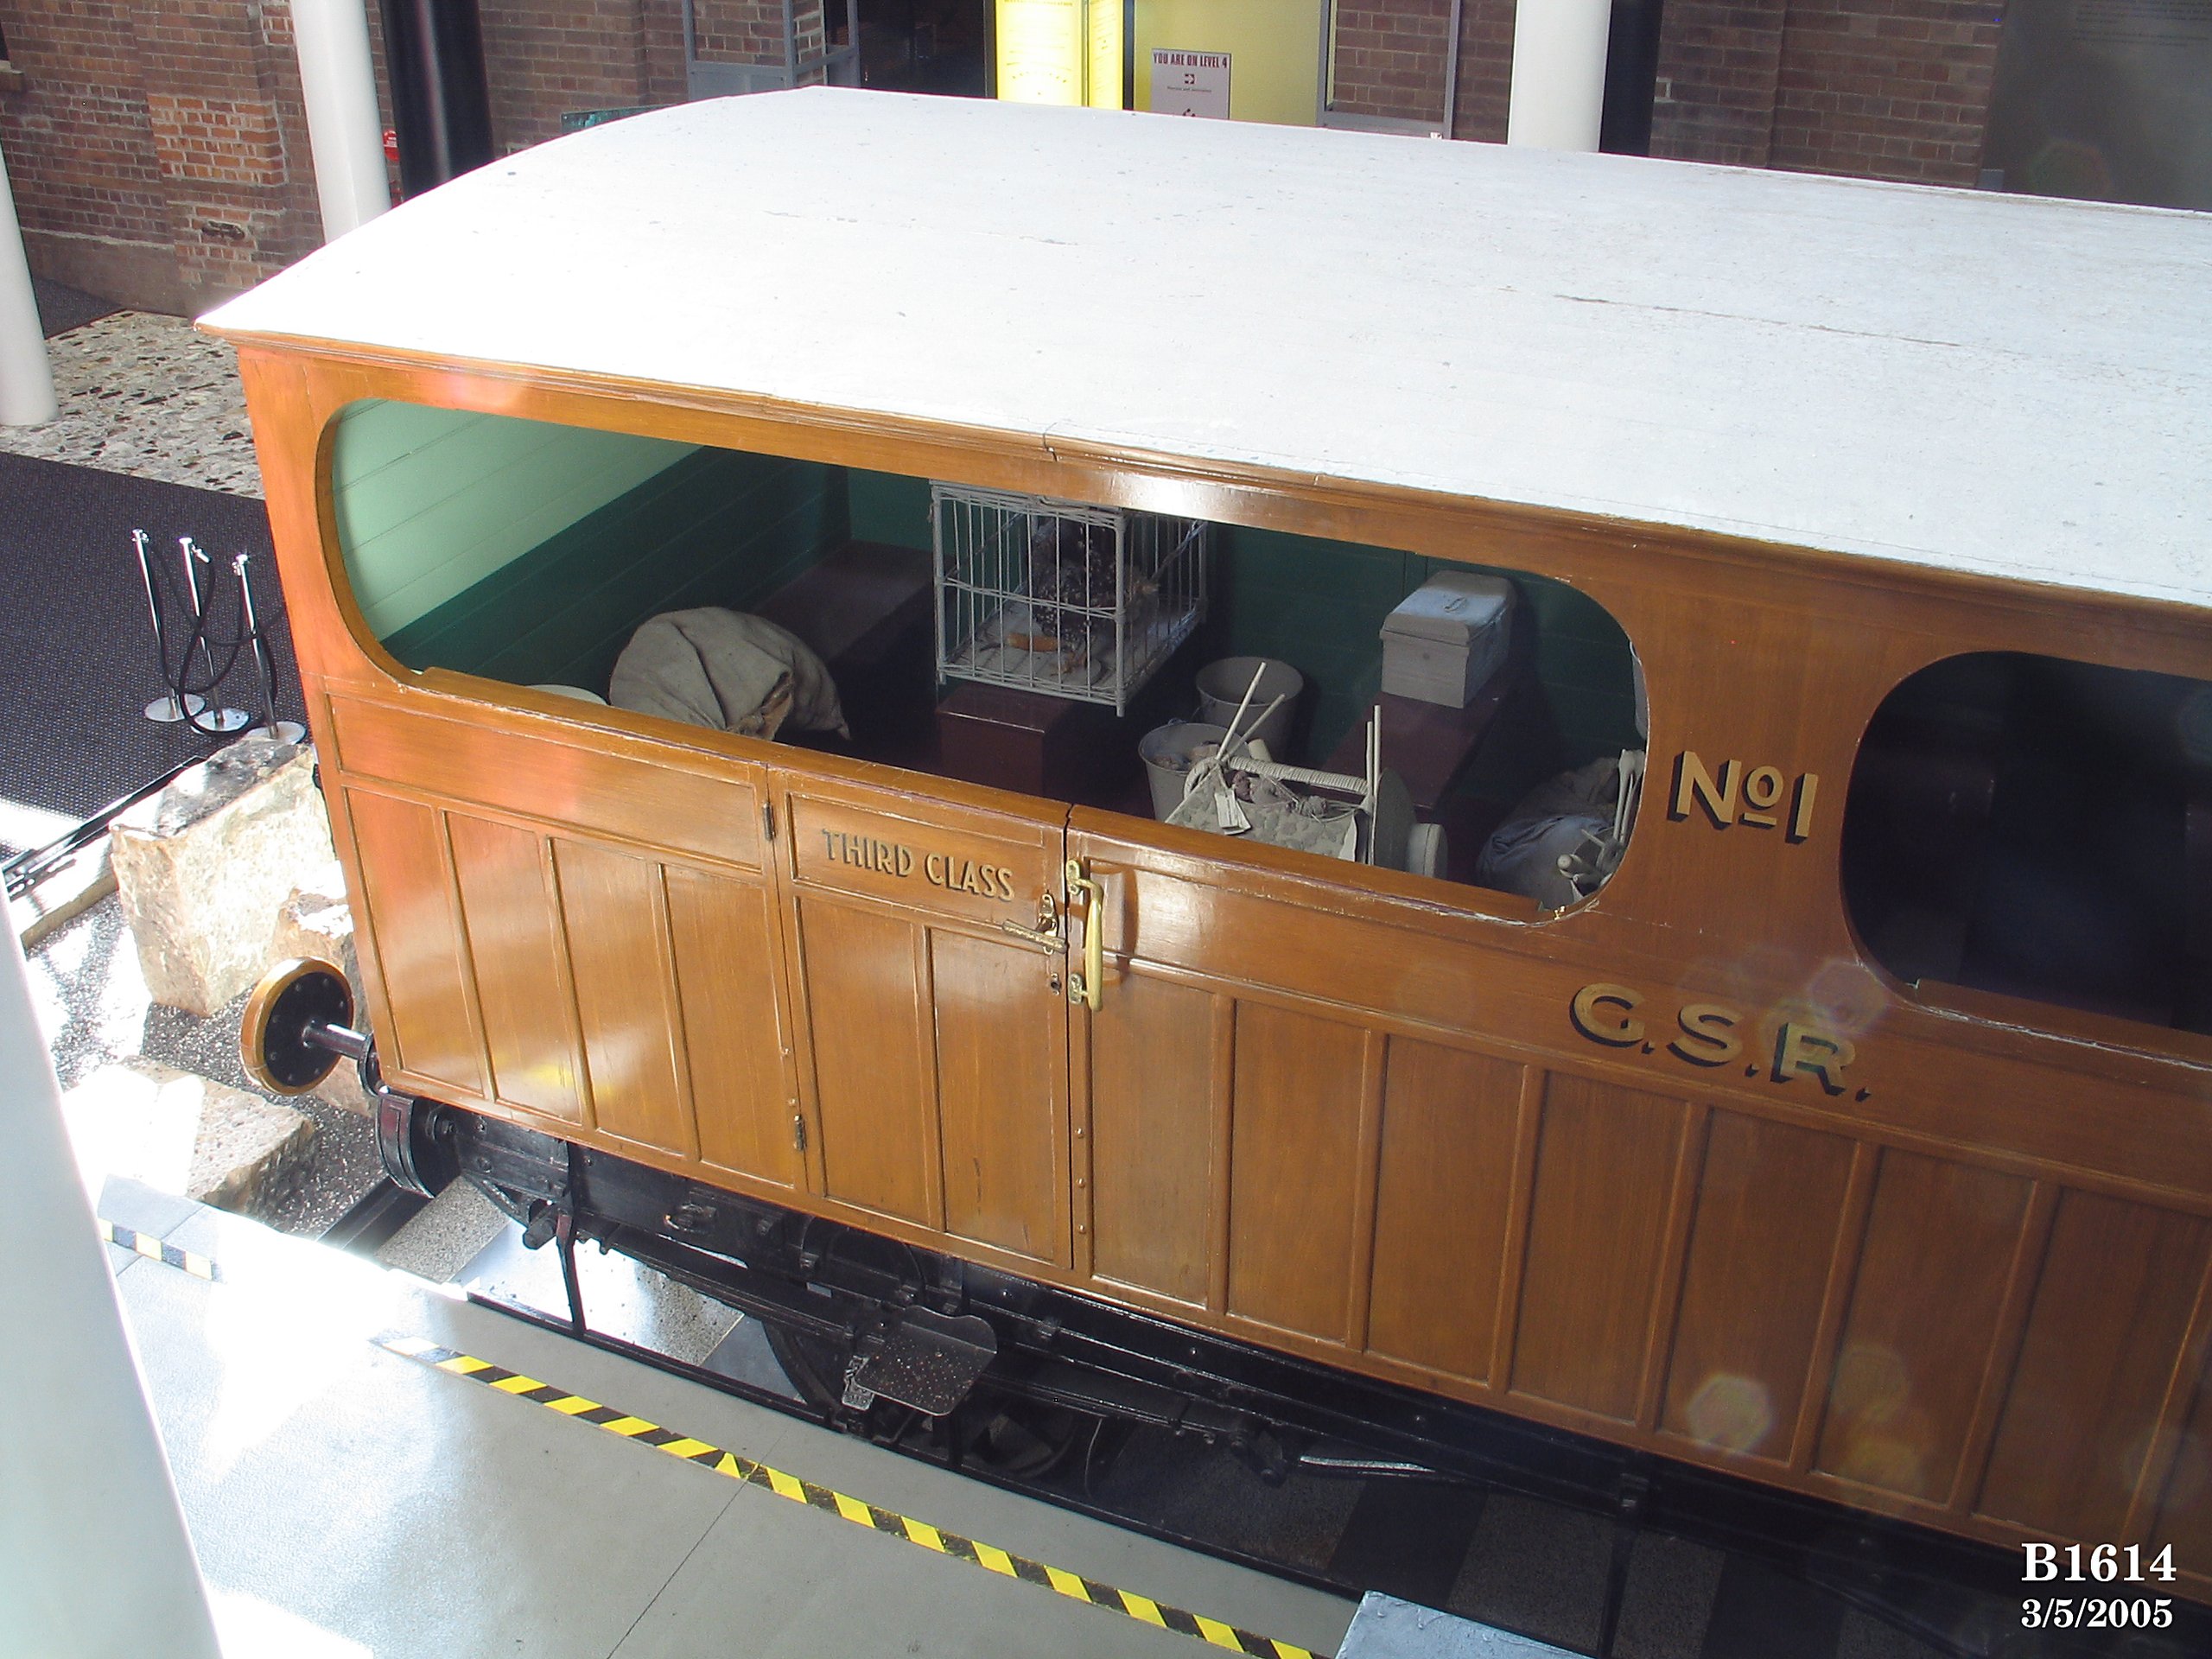 Third class railway carriage used on first railway in New South Wales